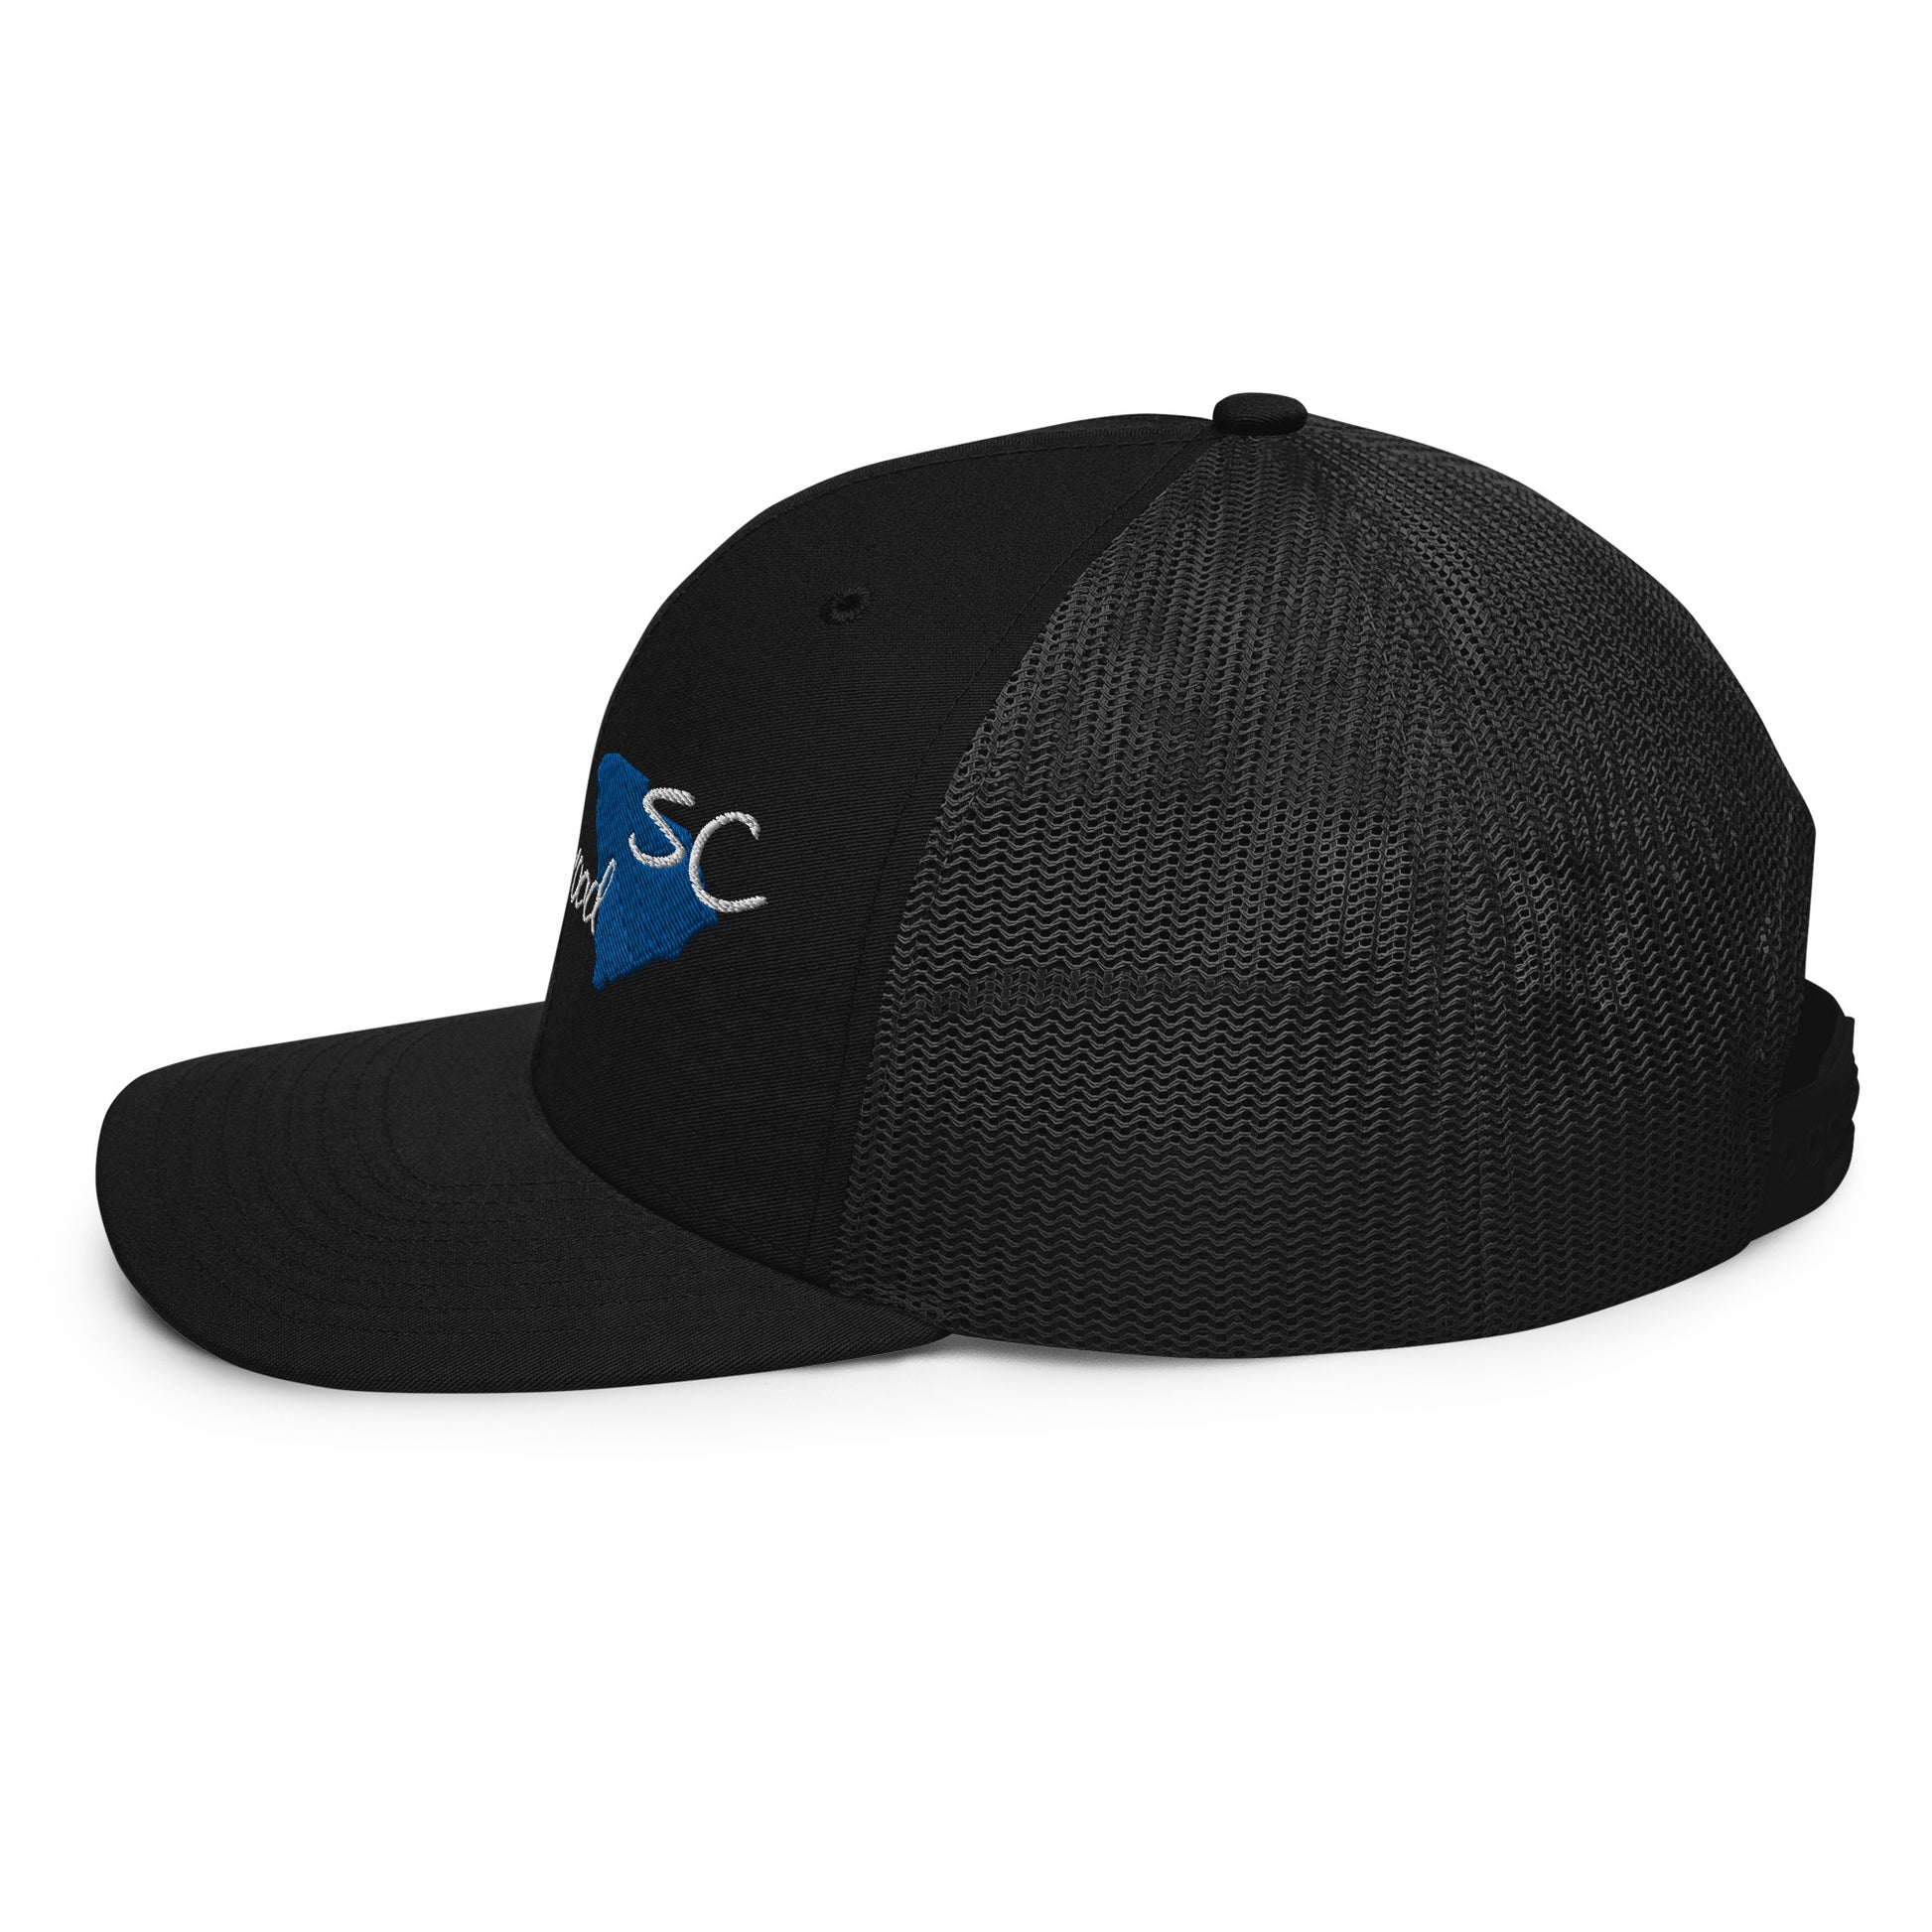 a black hat with a blue and white logo